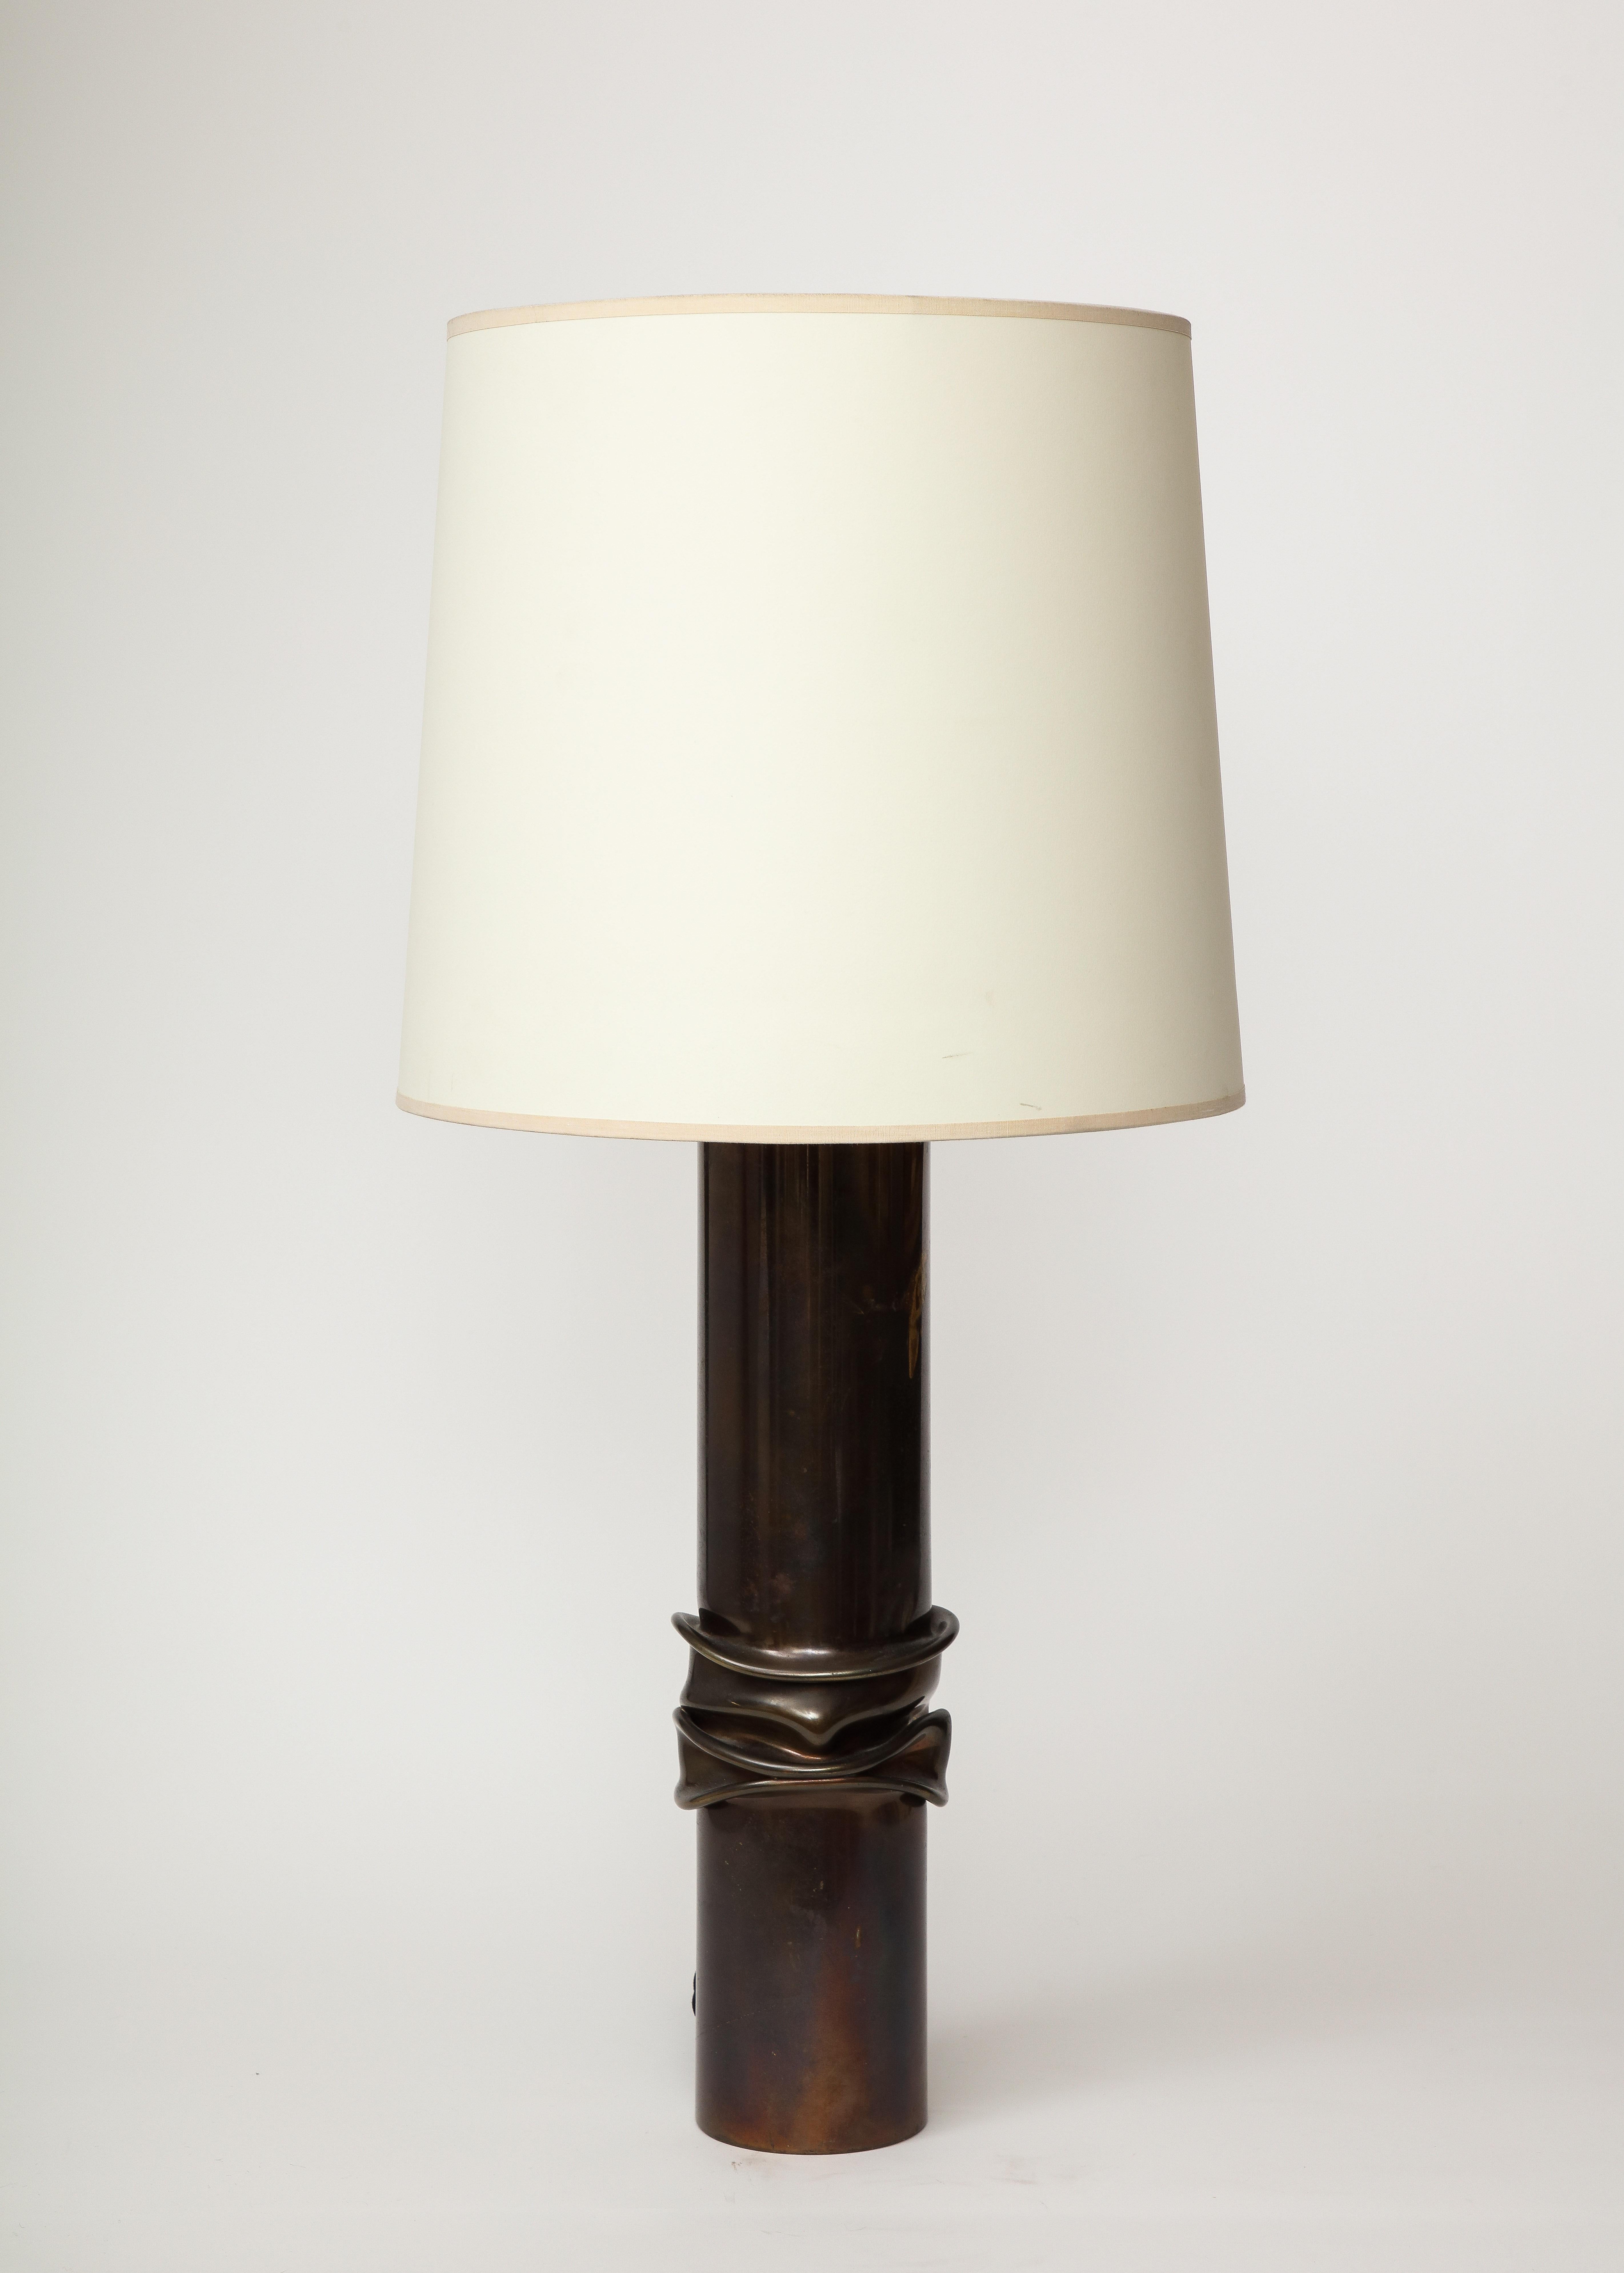 Tall, sleek design. It looks as if the center lamp went through a hydraulic press or melting process. Industrial yet refined.

This table lamp was recently rewired with a black twisted silk cord, bronze hardware, a dimmer at the neck, and an